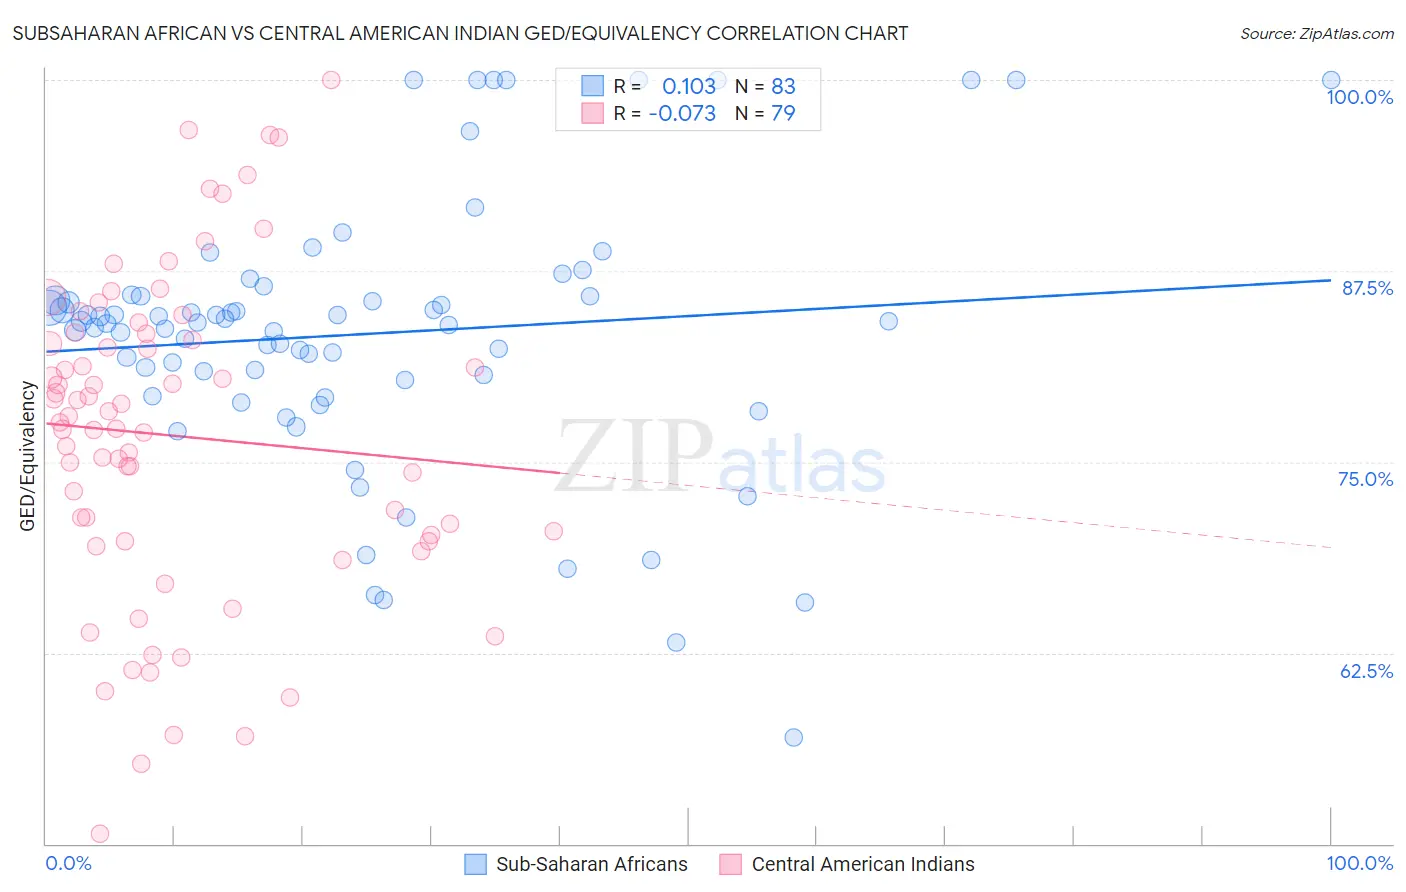 Subsaharan African vs Central American Indian GED/Equivalency